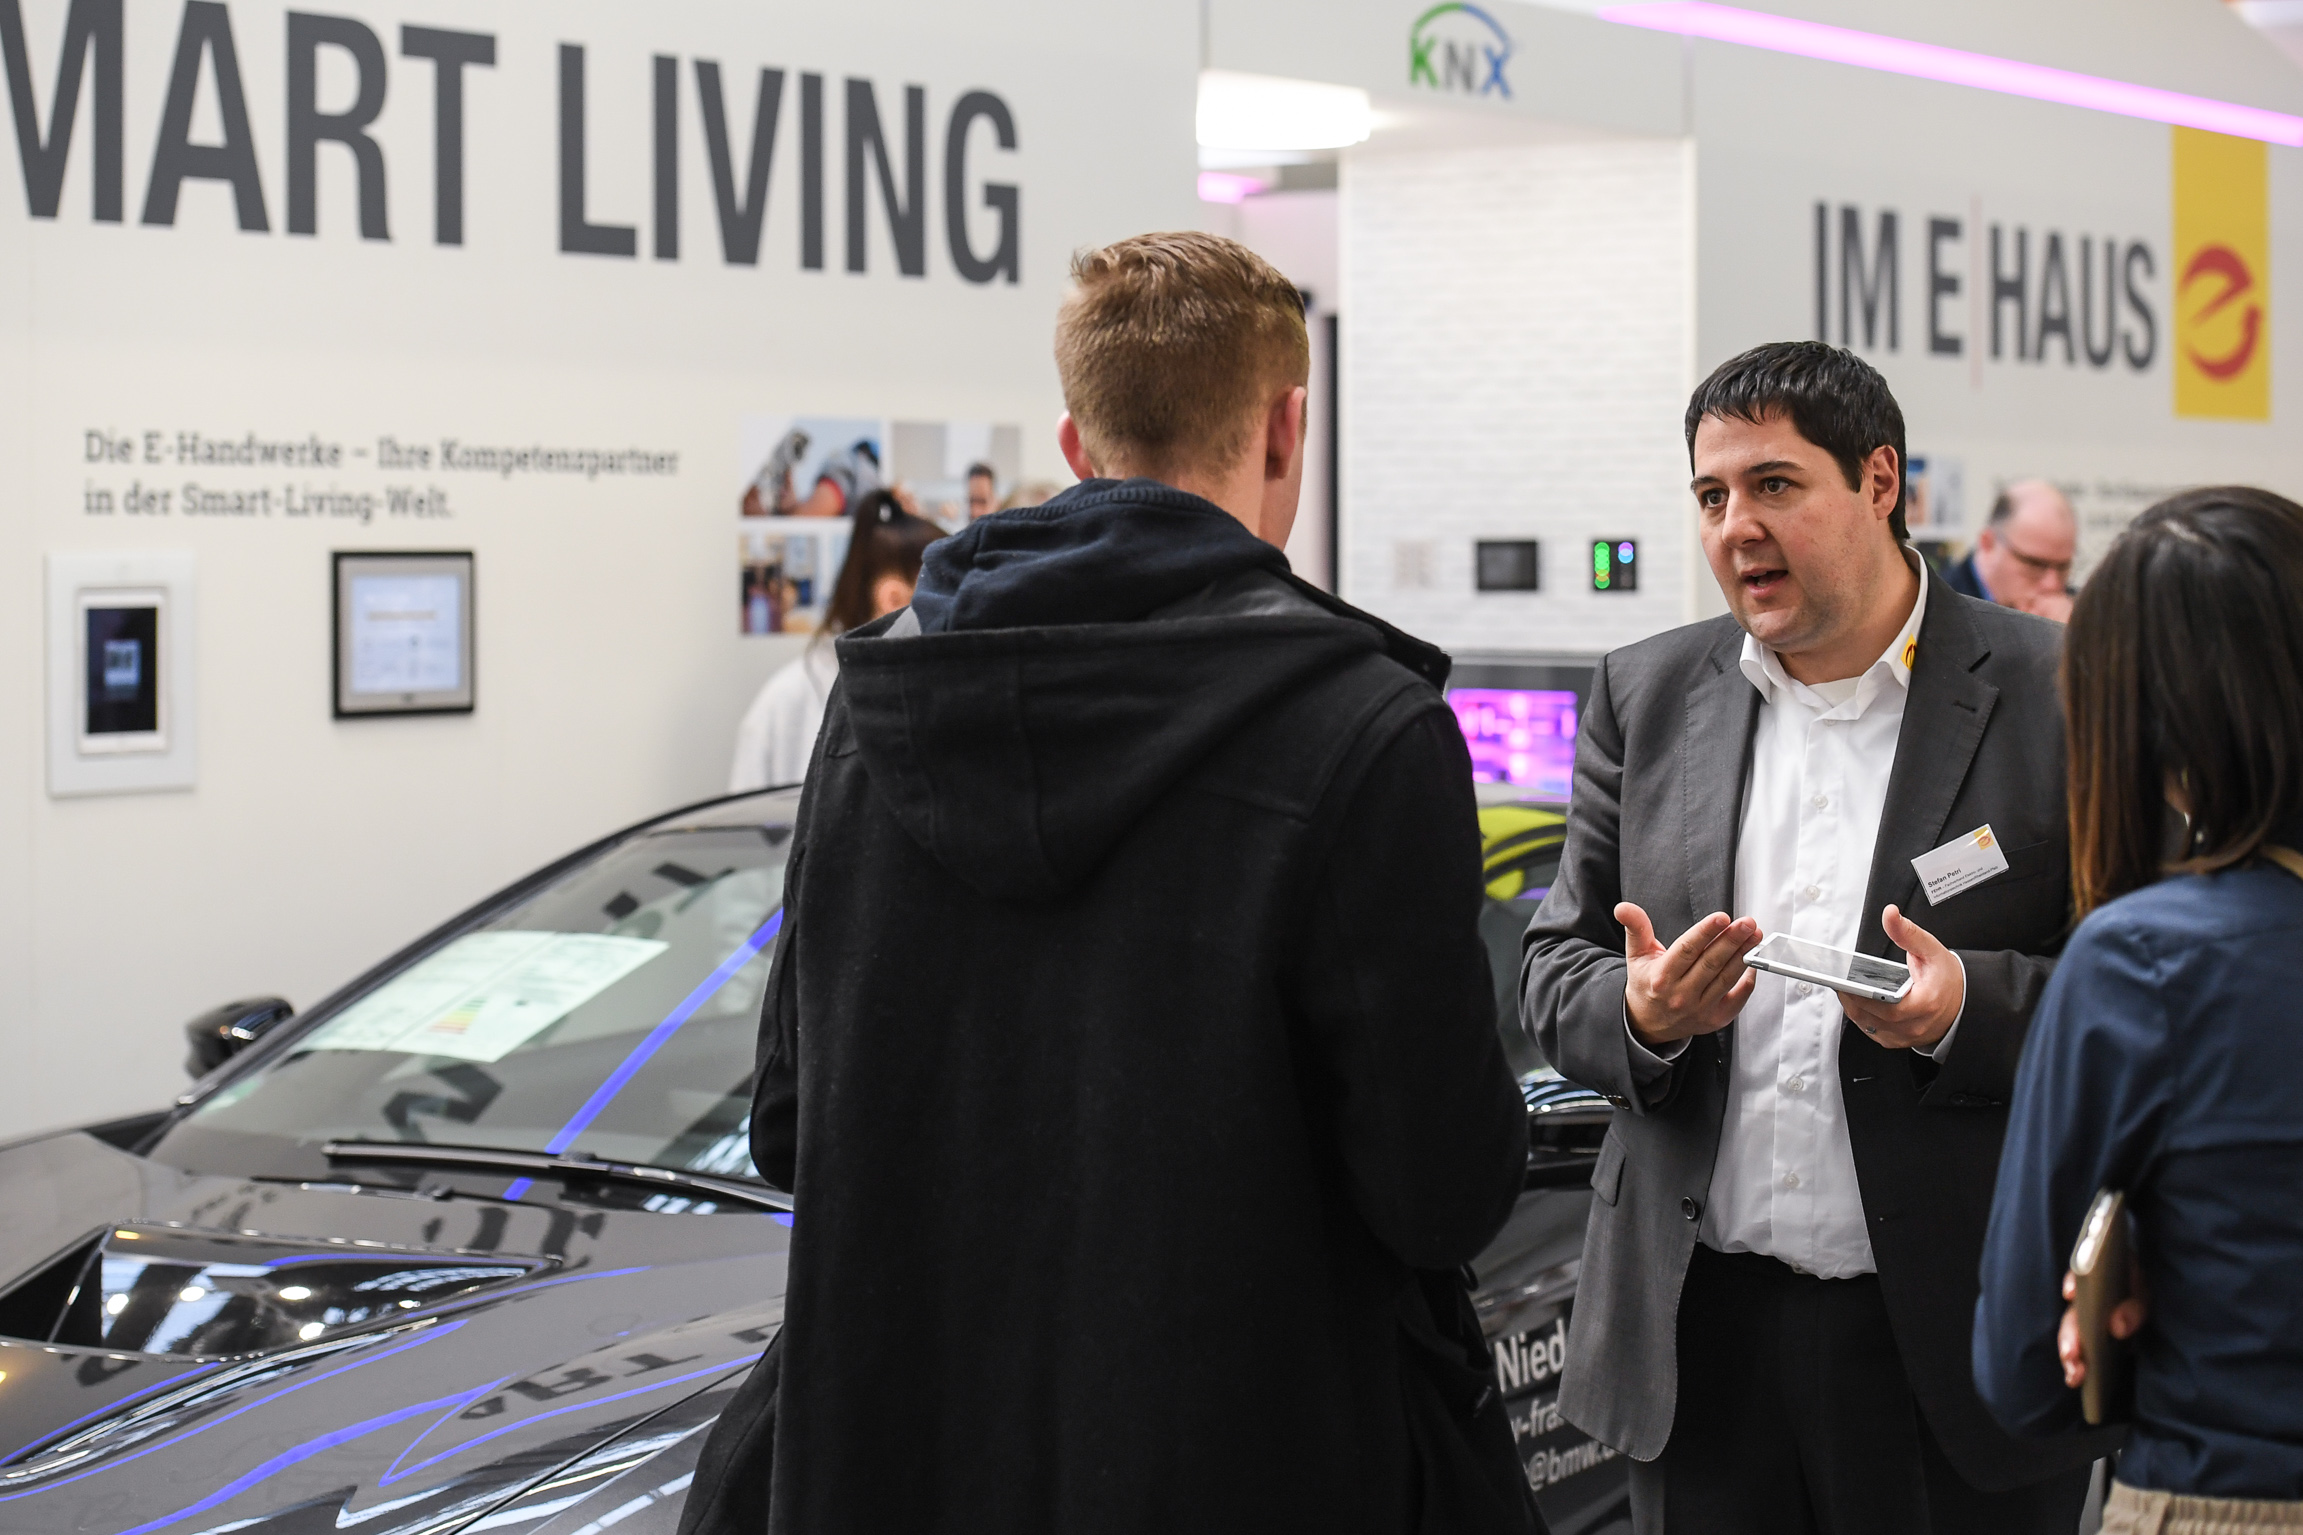 Smart Living: It’s the exhibitors who connect themselves and the various applications in energy management, mobility, smart building and smart city at Light + Building. (Source: Messe Frankfurt / Pietro Sutera 2018)